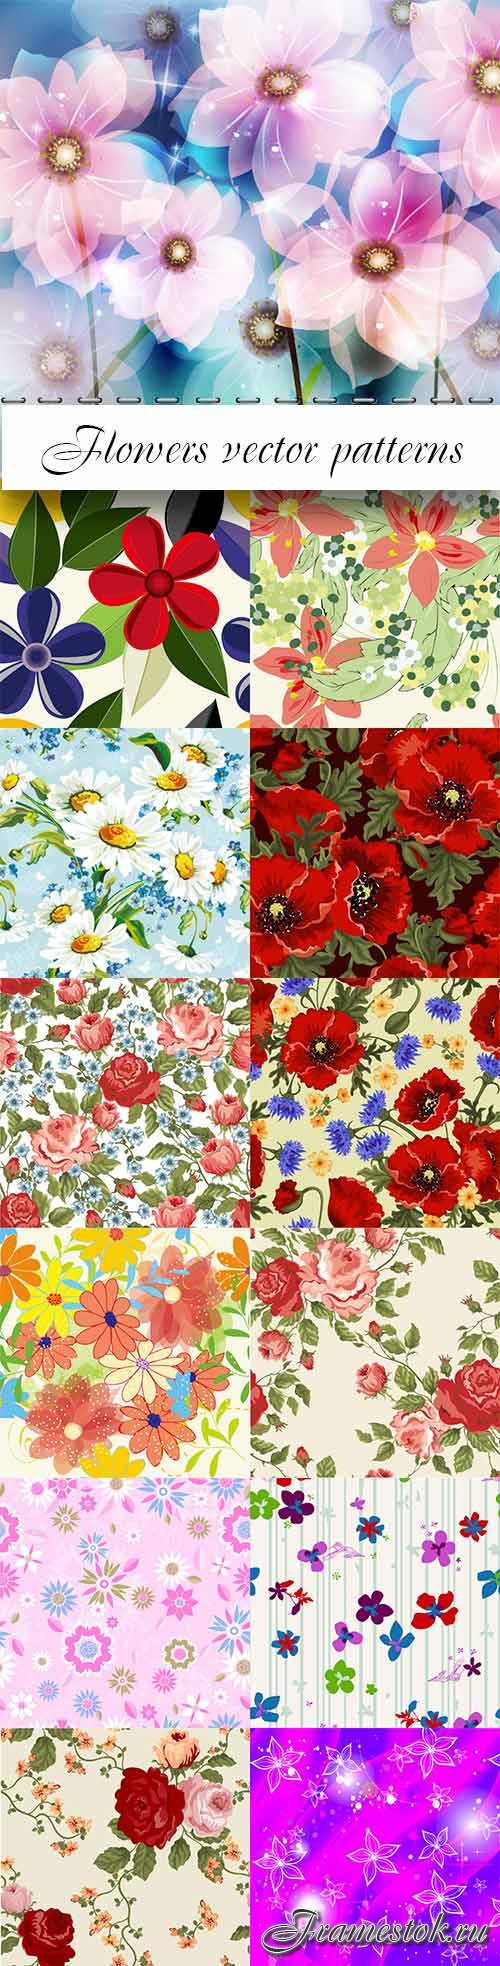 Flowers vector patterns